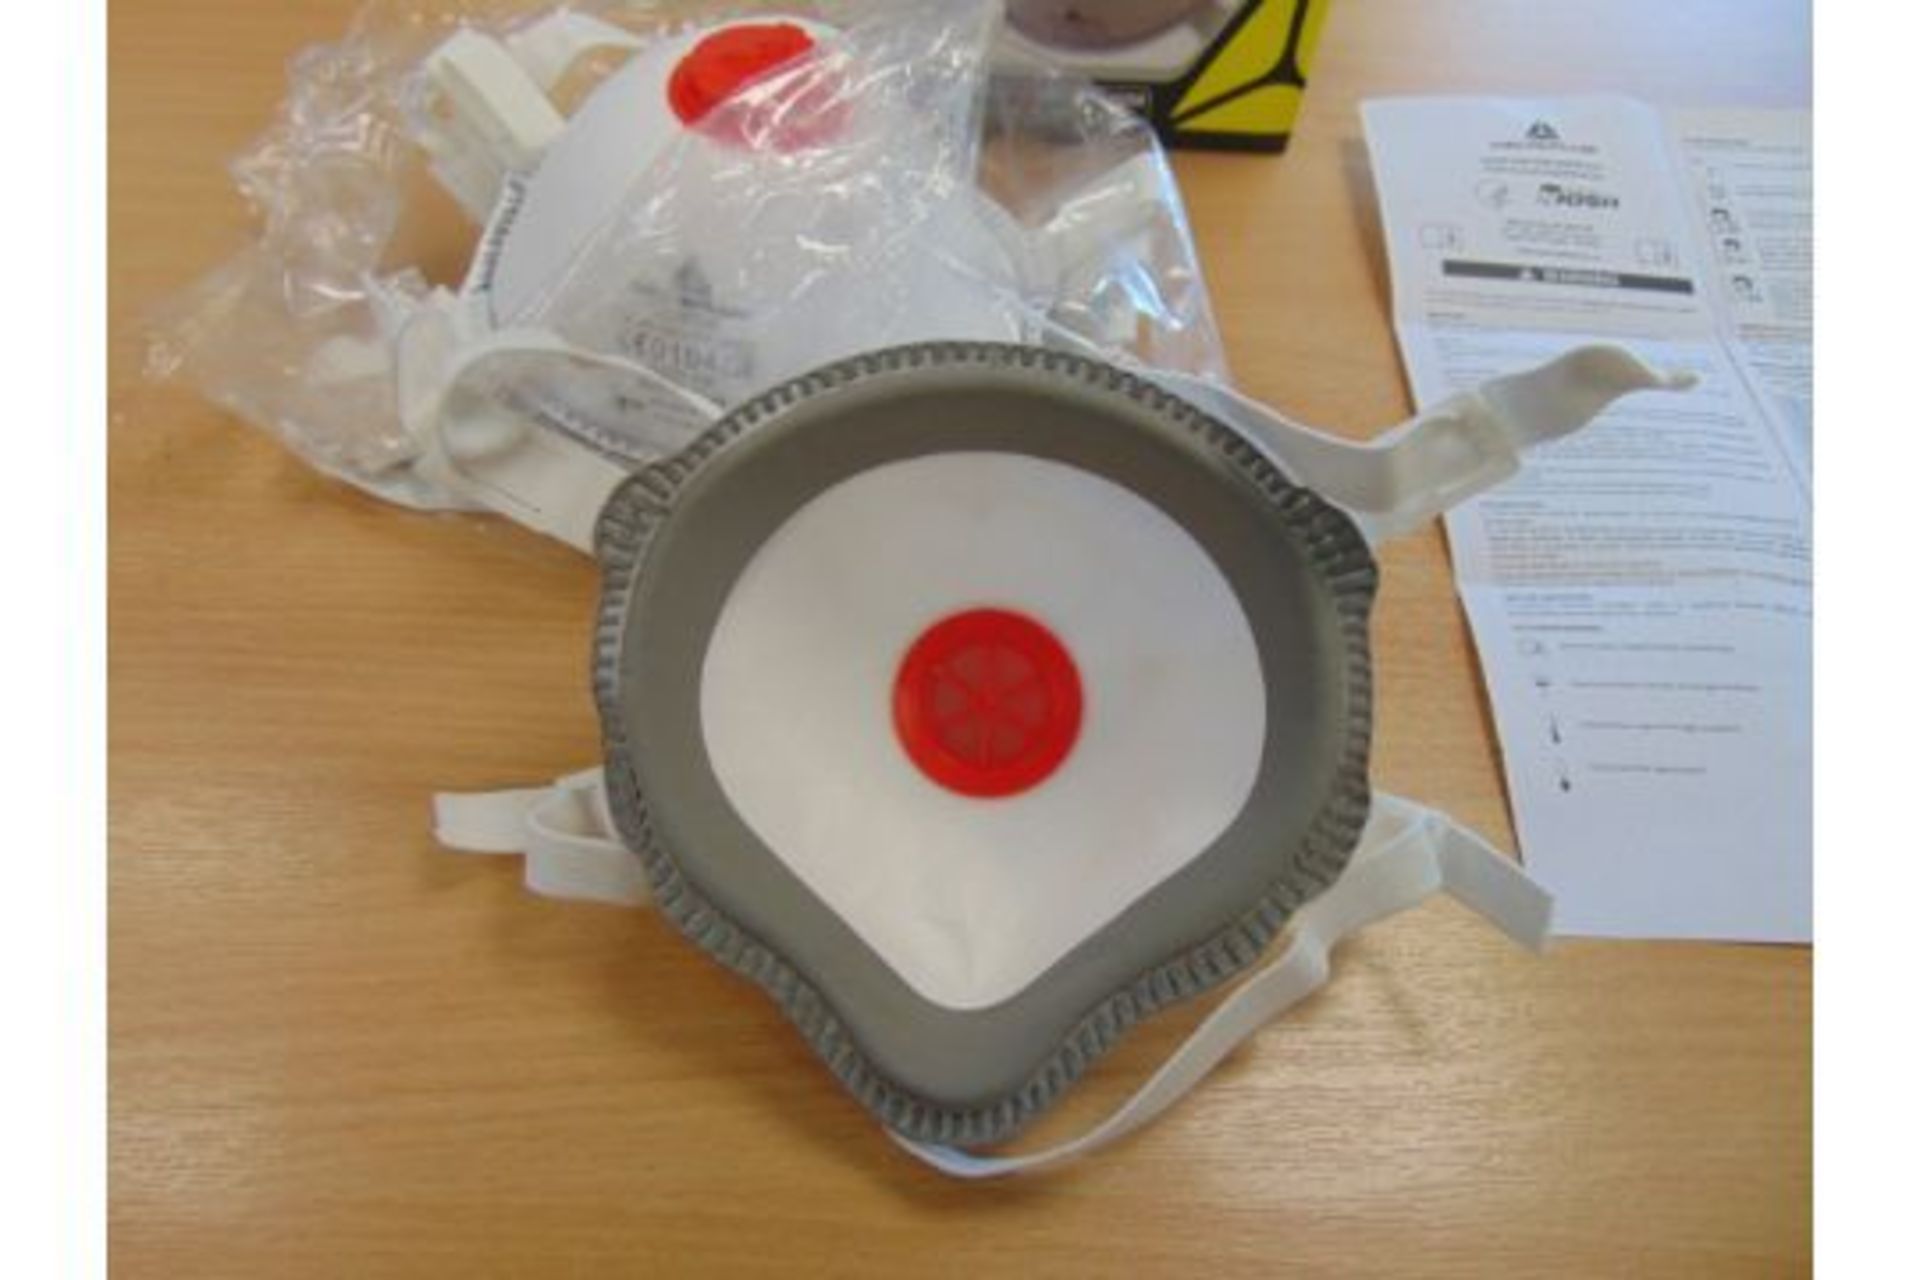 1 PALLET OF 1050 NEW UNUSED DELTA PLUS HIGH QUALITY DUST RESPIRATOR MASKS CE MARKED WITH VALVE - Image 5 of 8